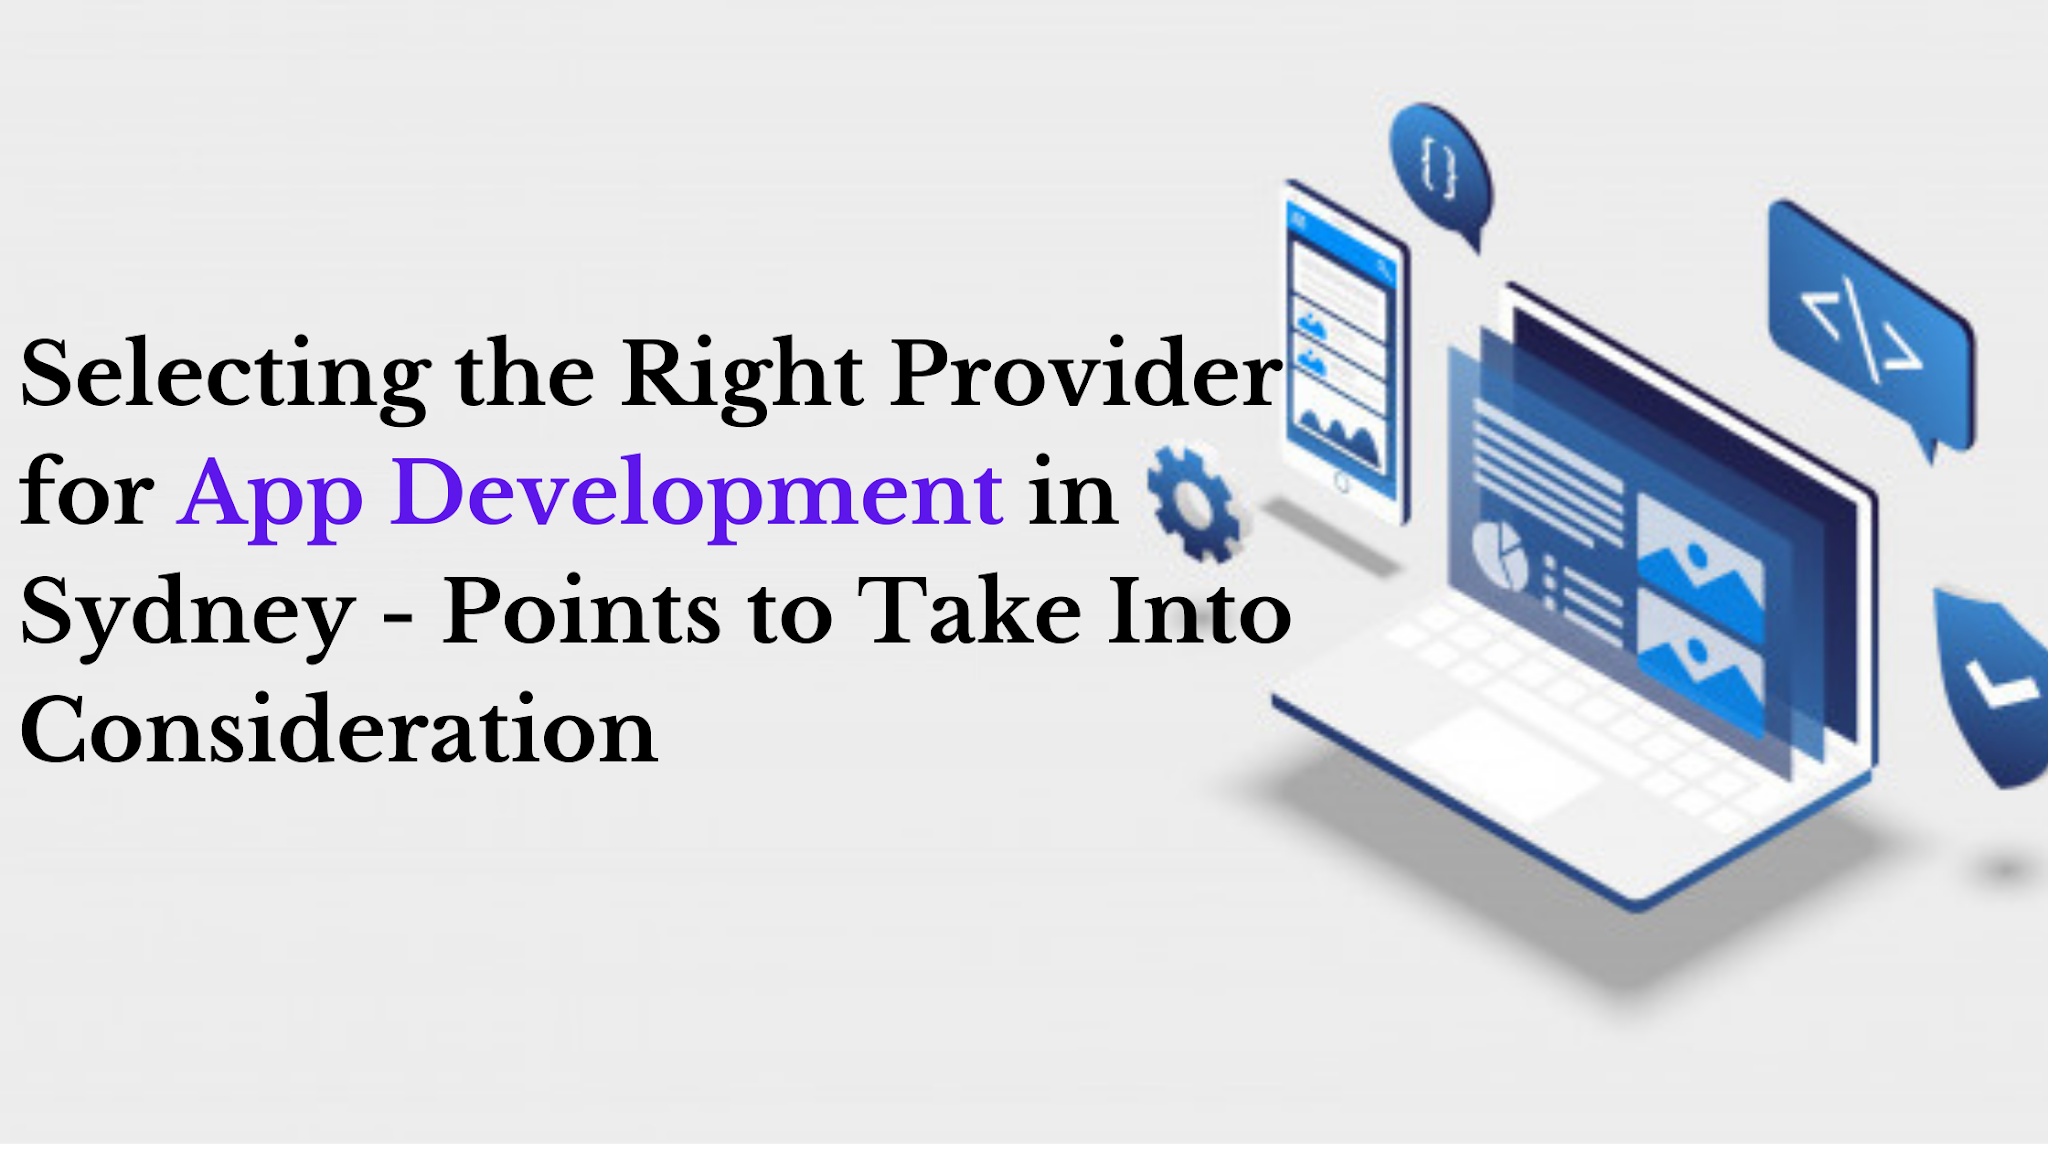 Selecting the Right Provider for App Development in Sydney - Points to Take Into Consideration